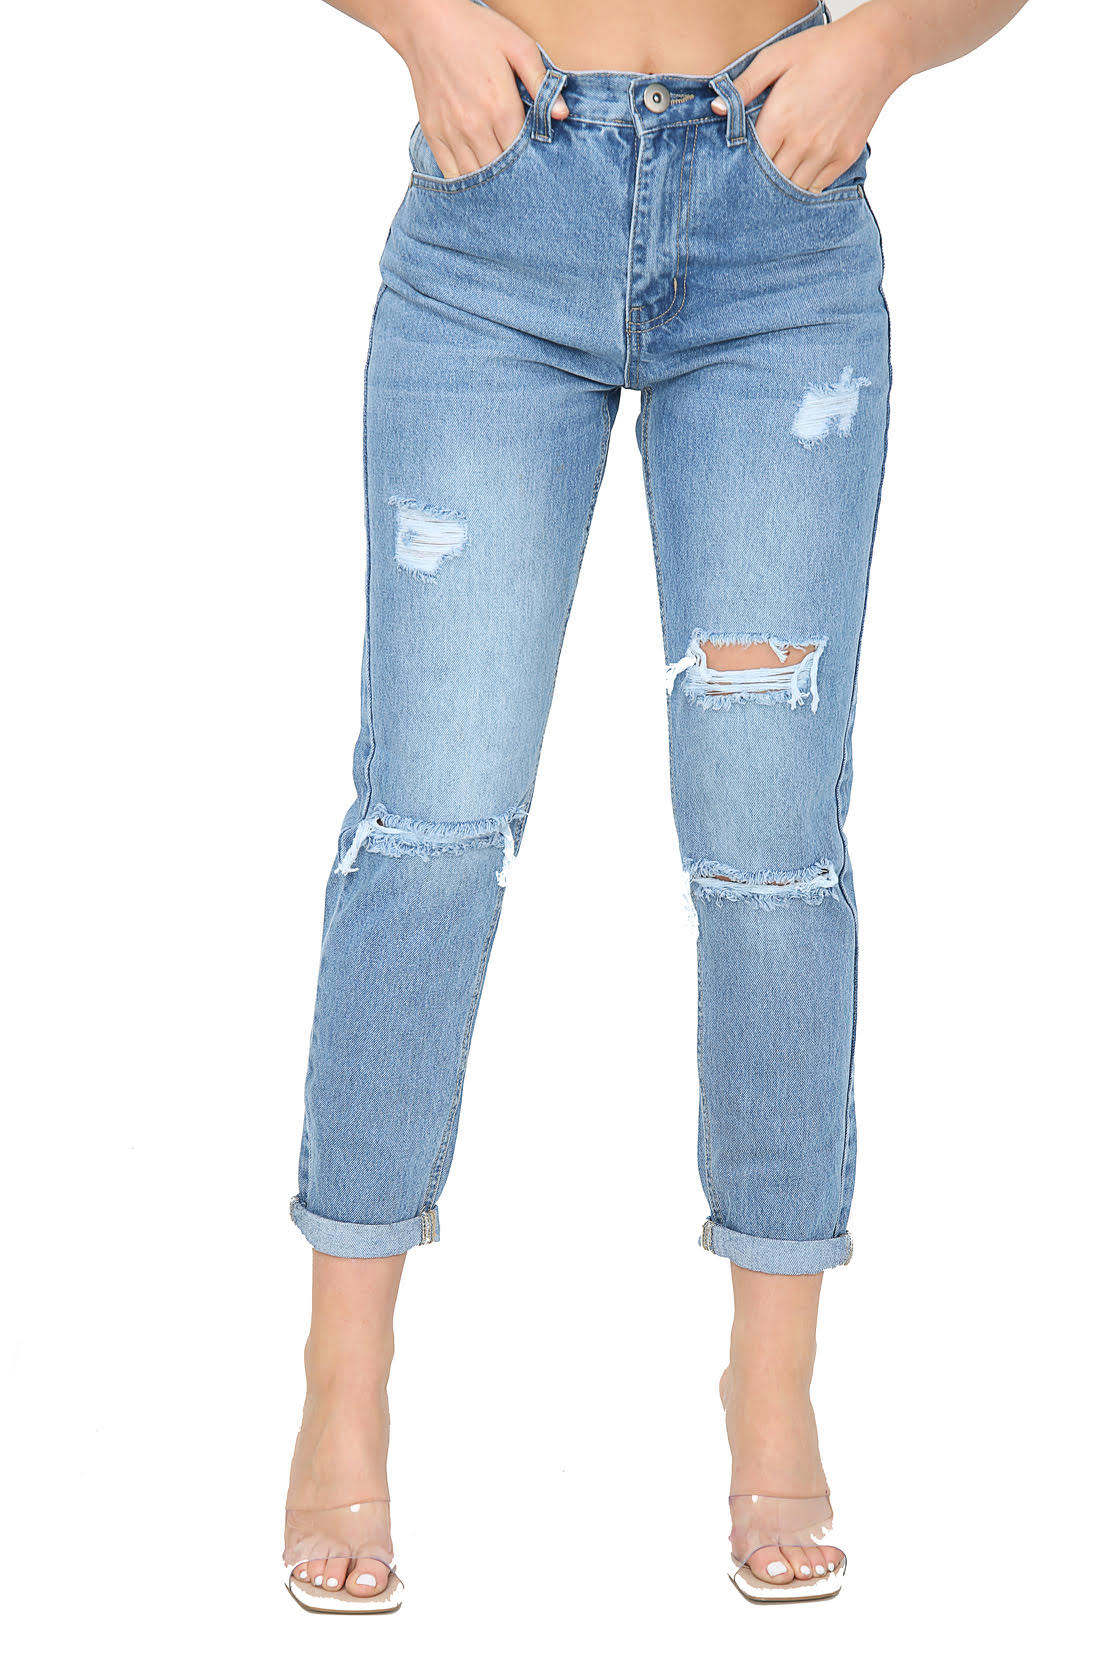 Ladies Light Wash Loose Fit Jeans. Sizes 6 To 14. Front Image